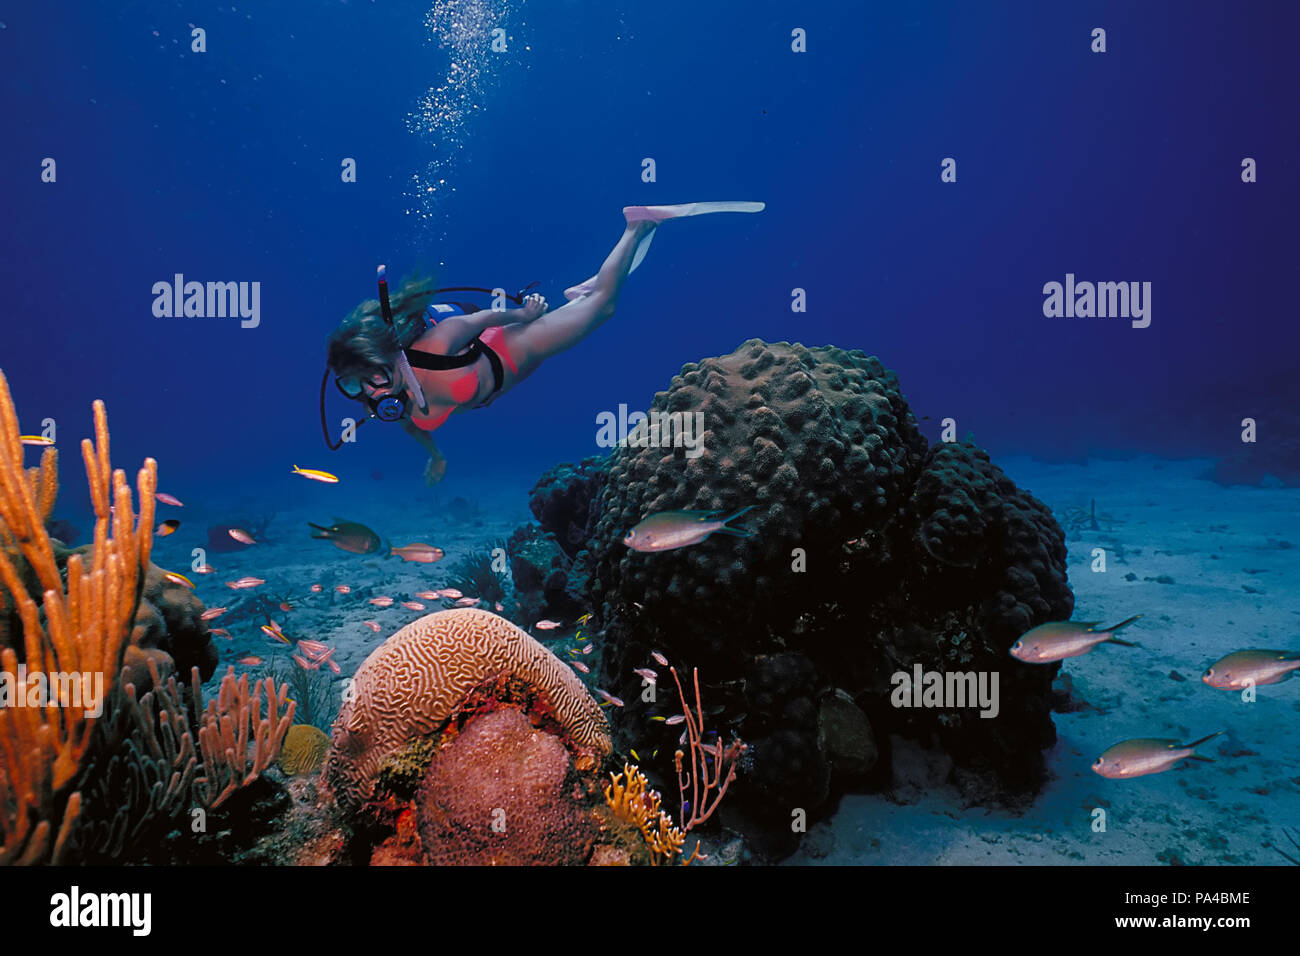 A scuba diving girl in a bikini poses above the coral reef in the warm waters at St. Croix Island in US Virgin Islands. Stock Photo